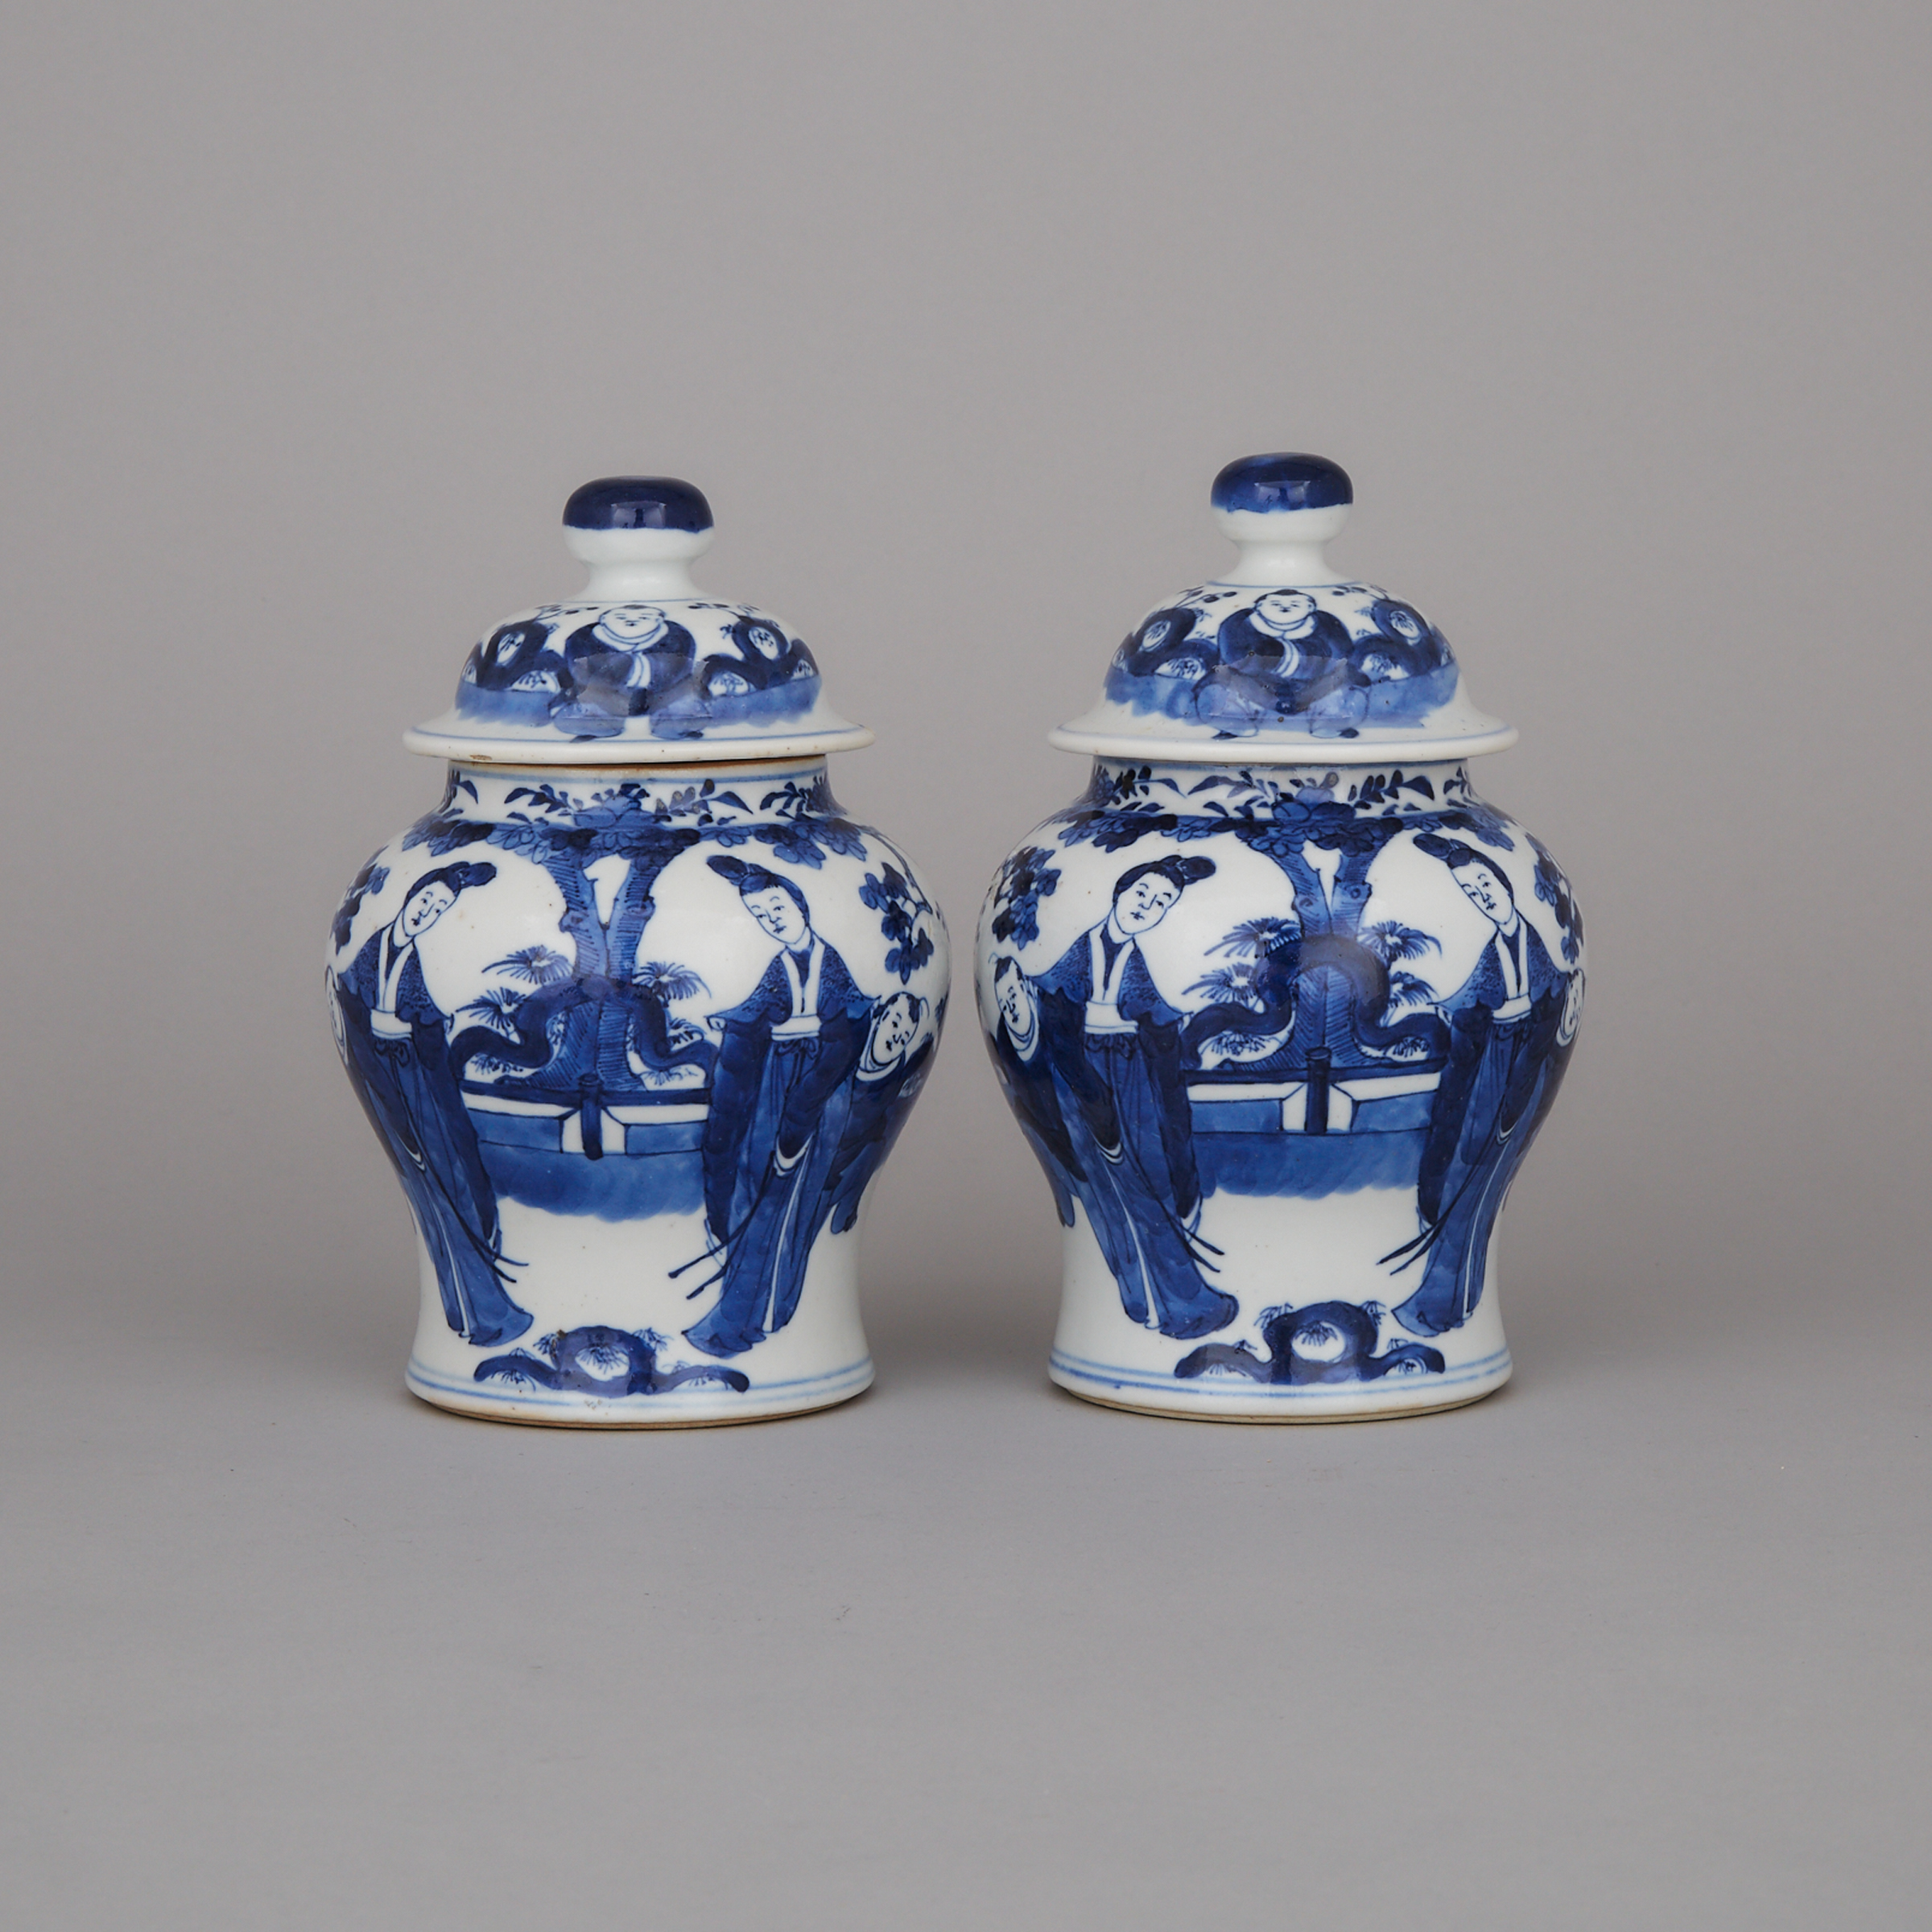 A Pair of Blue and White Lidded Jars